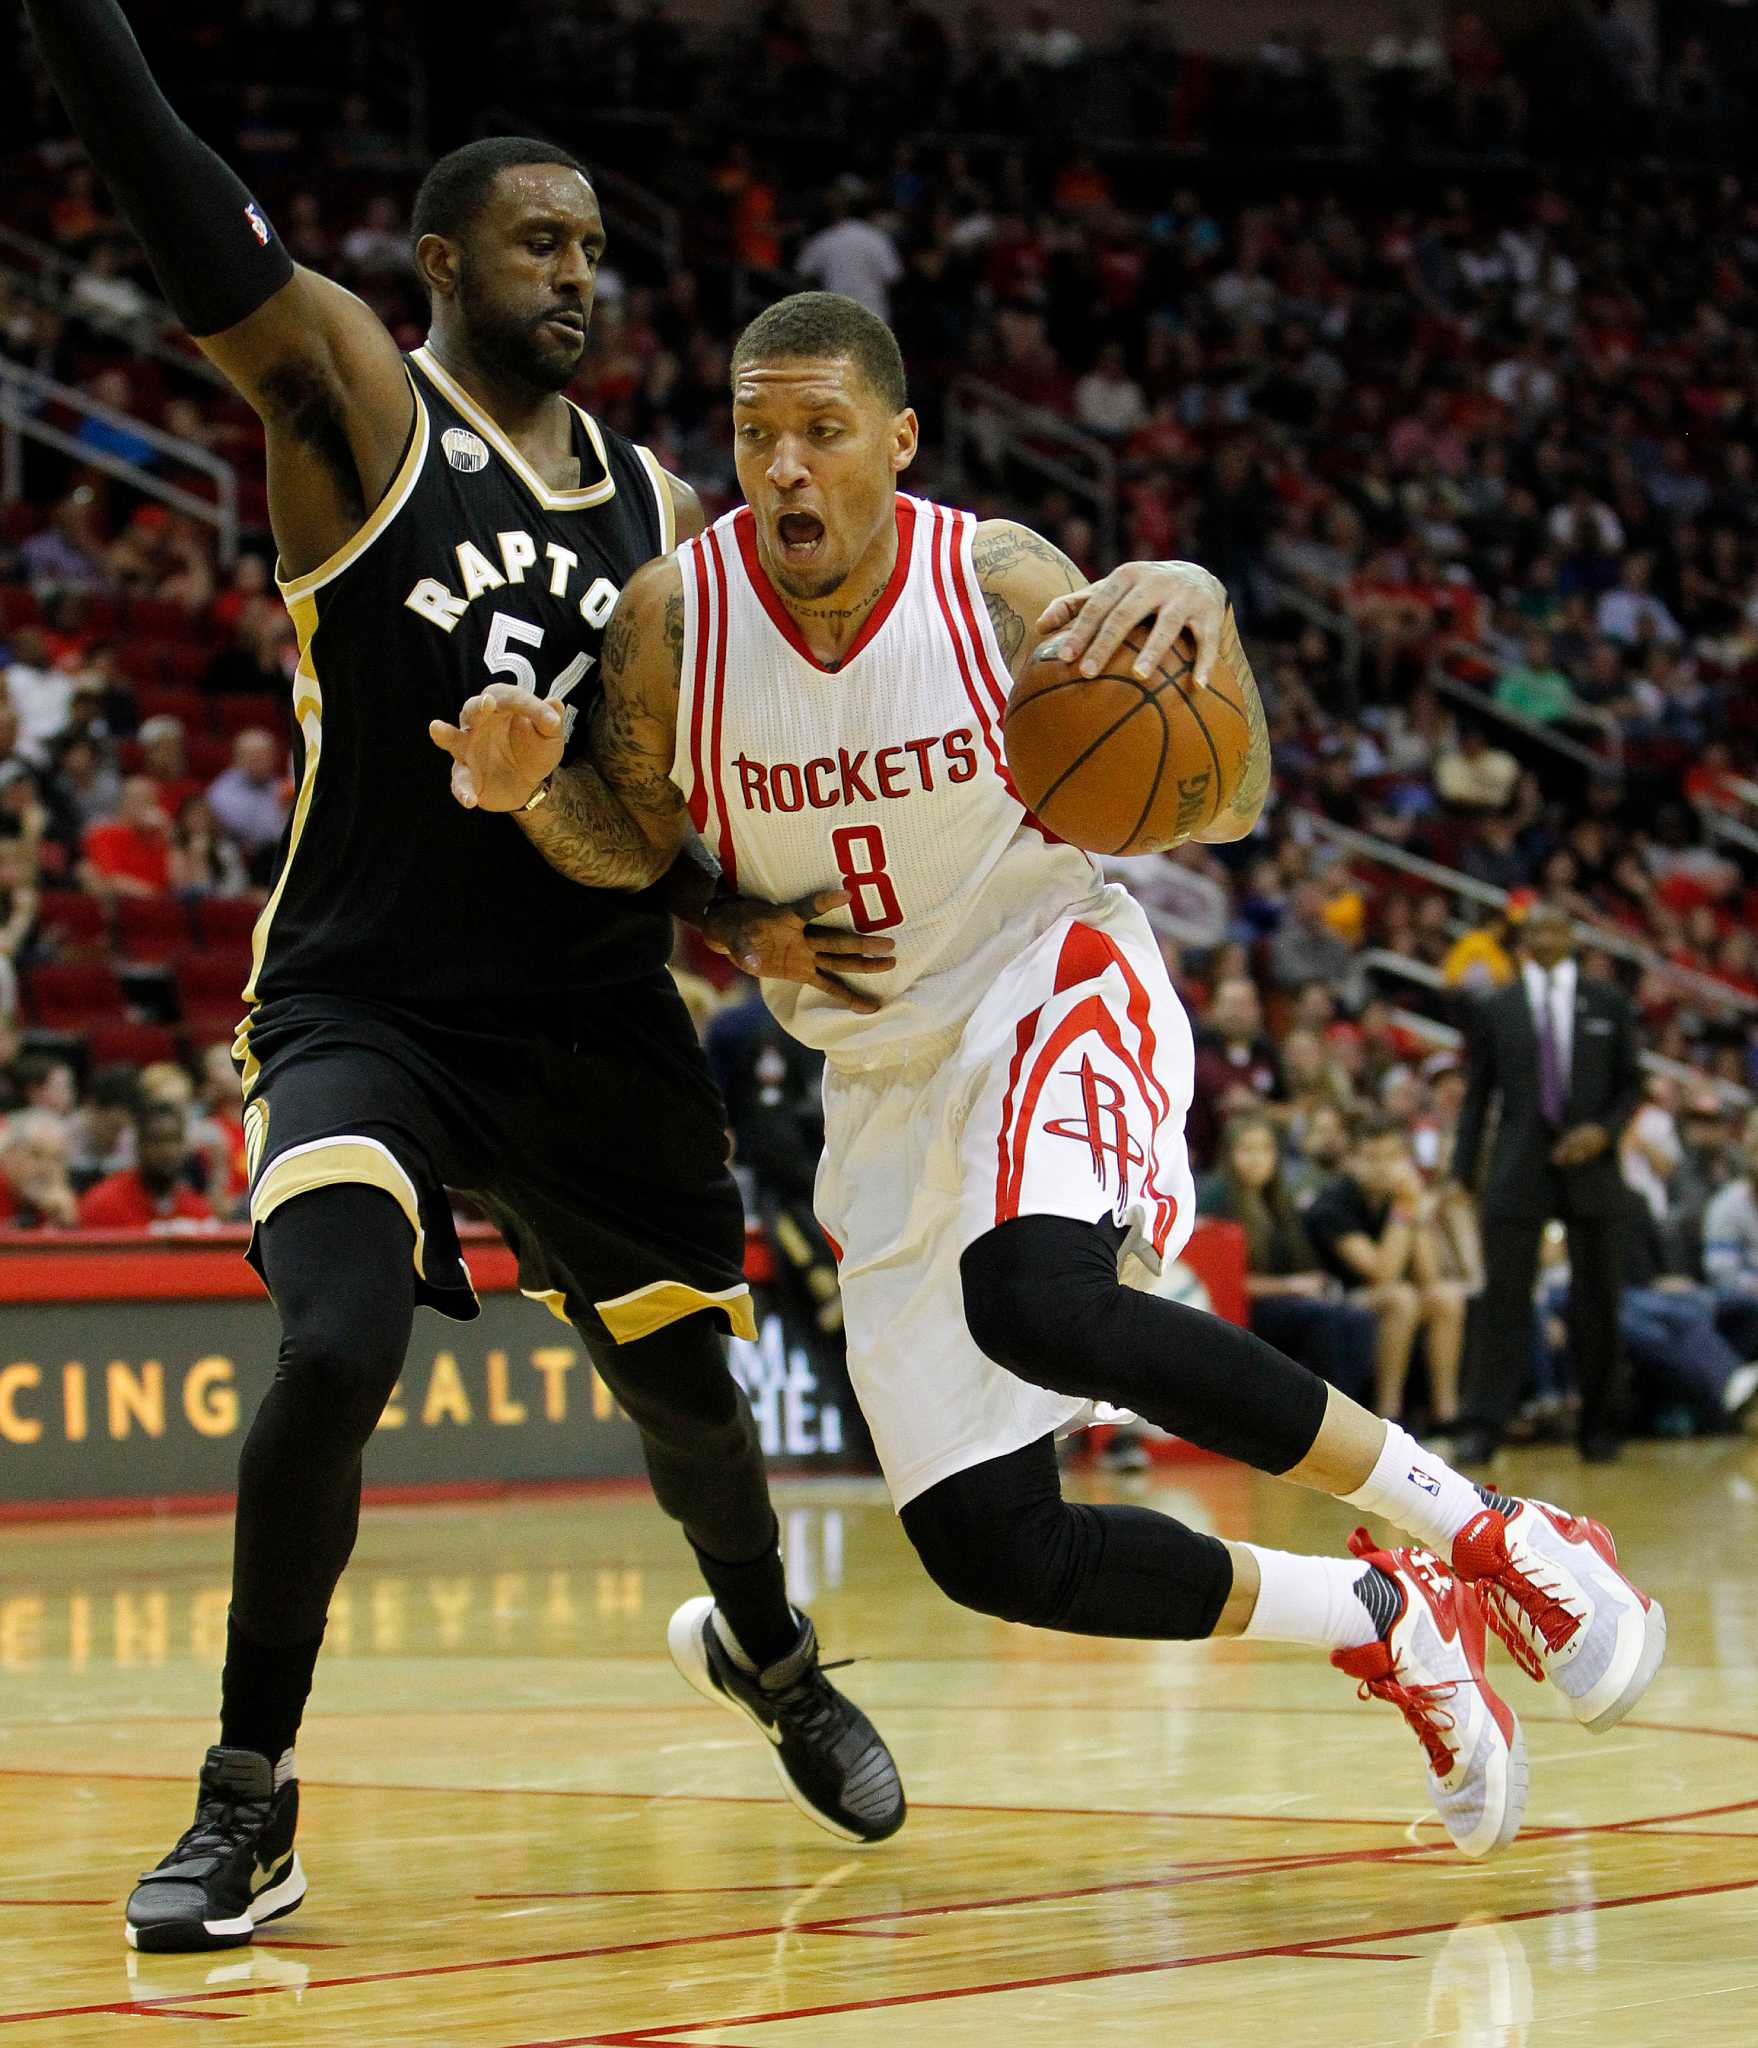 Pacers hold meeting after blowout loss to Rockets 